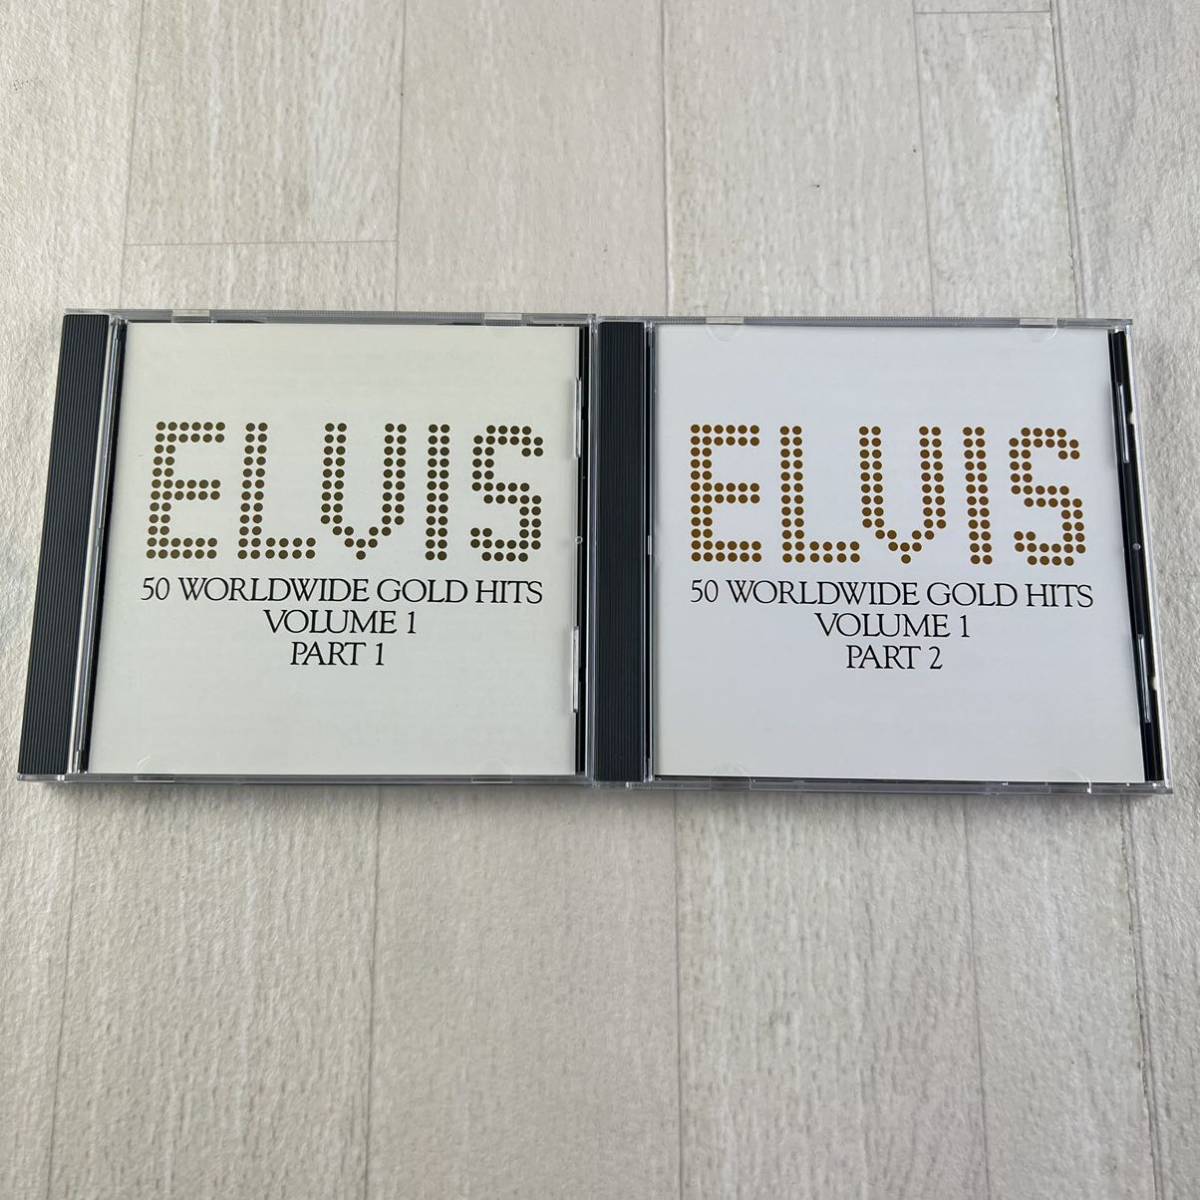 [7000] ELVIS 50 WORLDWIDE GOLD HITS VOLUME 1 PART 1 and PART 2 CD 2枚組 輸入盤 エルヴィス_画像4